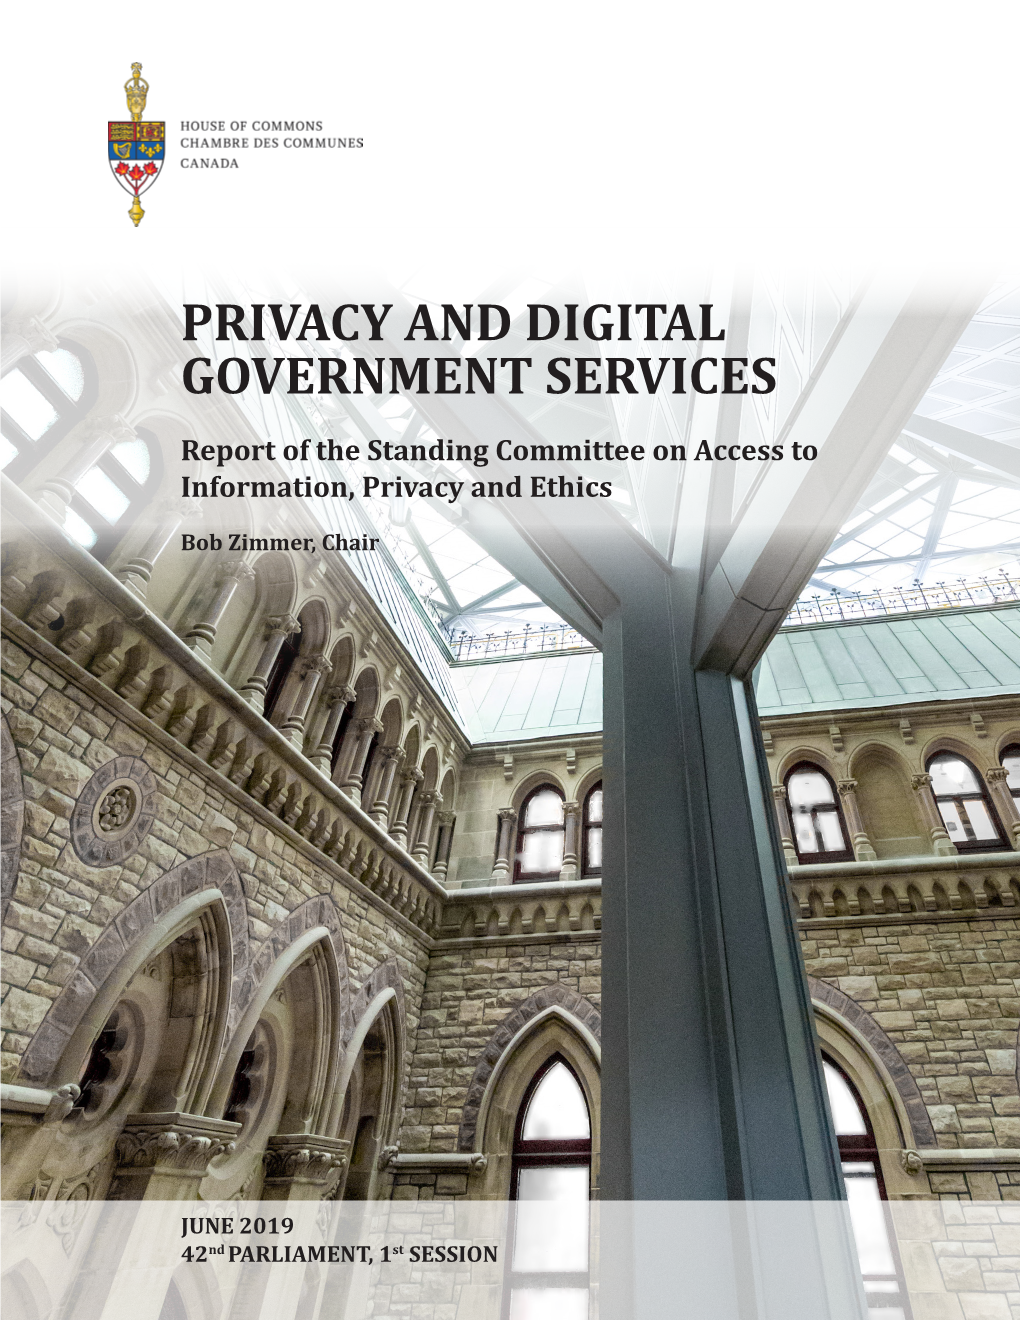 PRIVACY and DIGITAL GOVERNMENT SERVICES Report of the Standing Committee on Access to Information, Privacy and Ethics